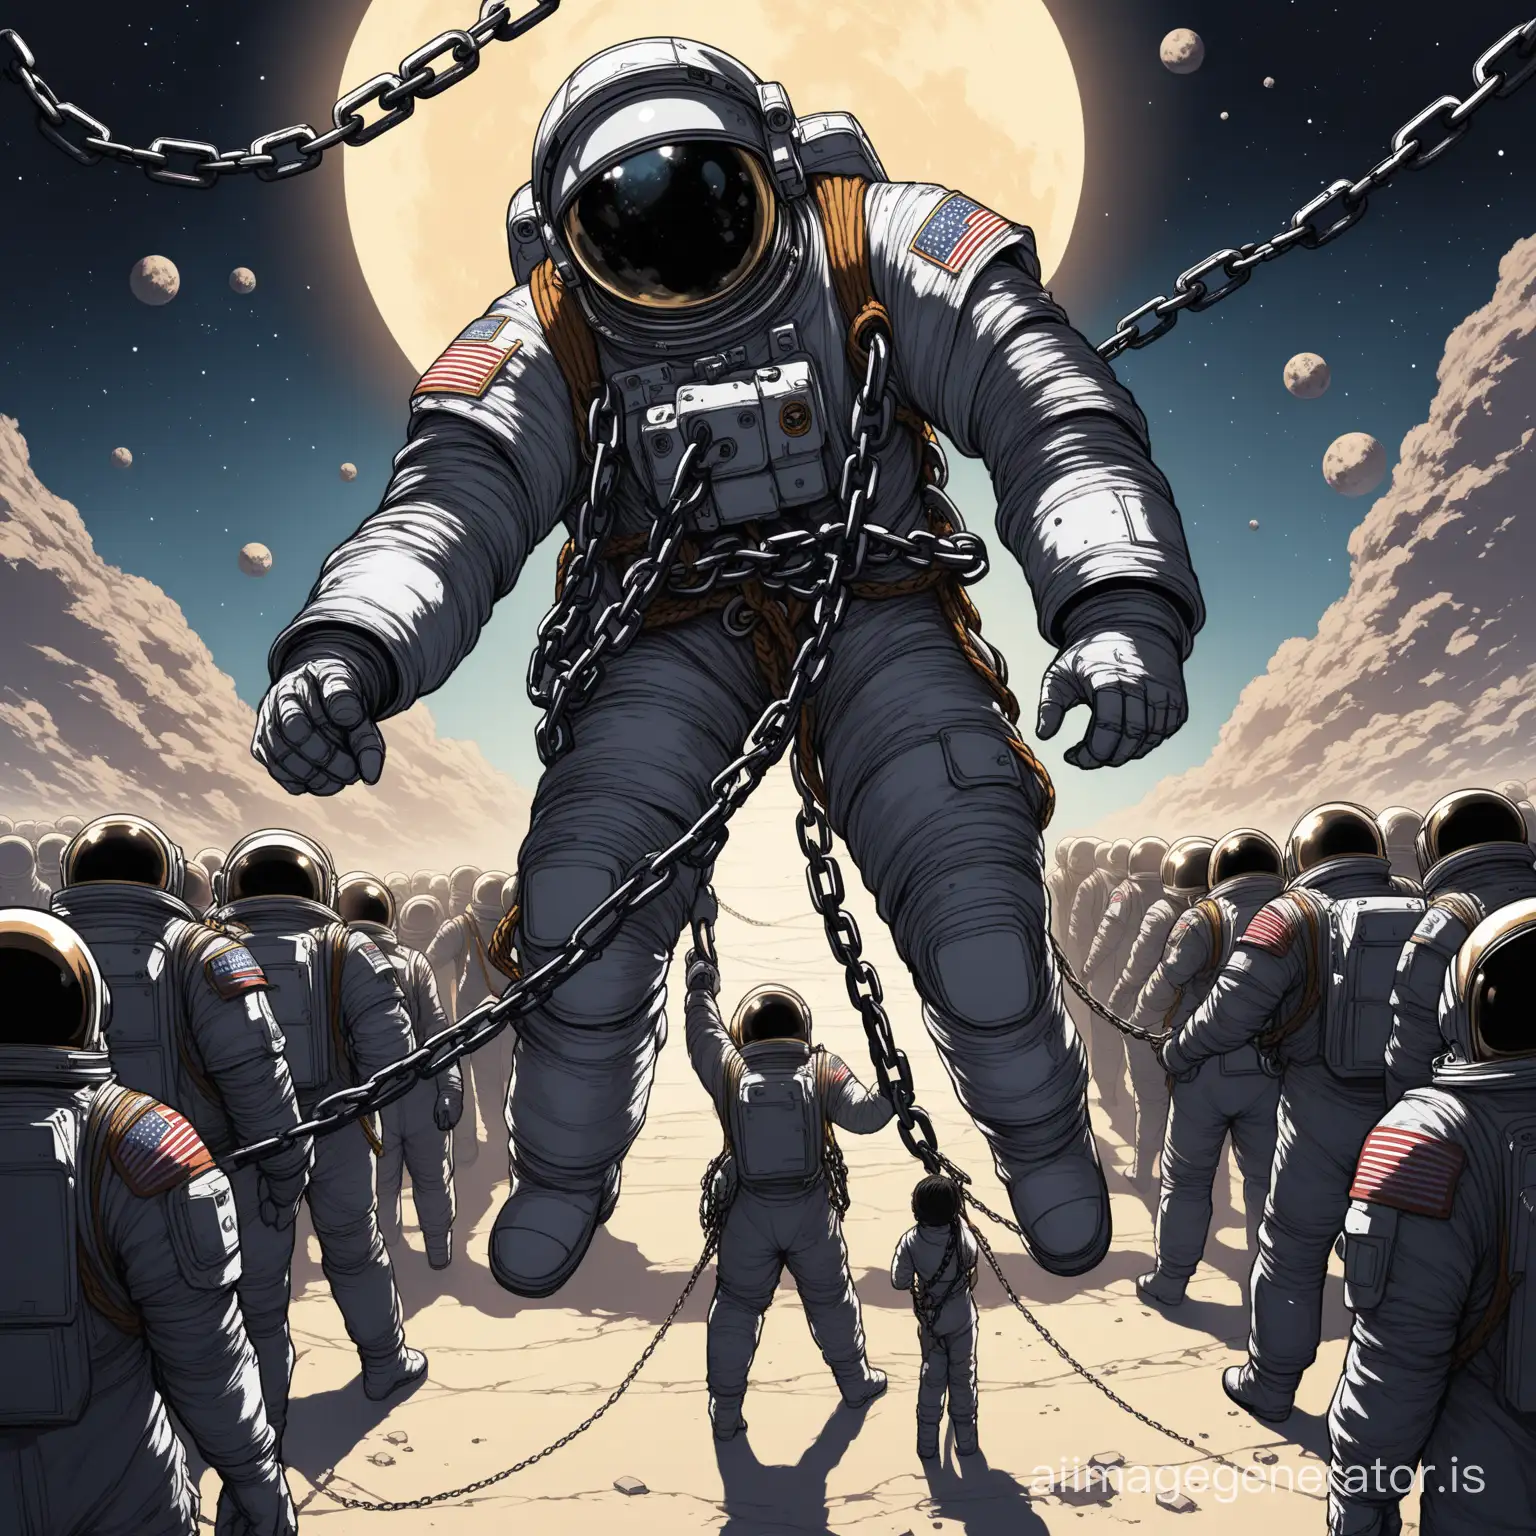 Evil-Tyrant-Astronaut-Dominating-Astronaut-Slaves-with-Giant-Chain